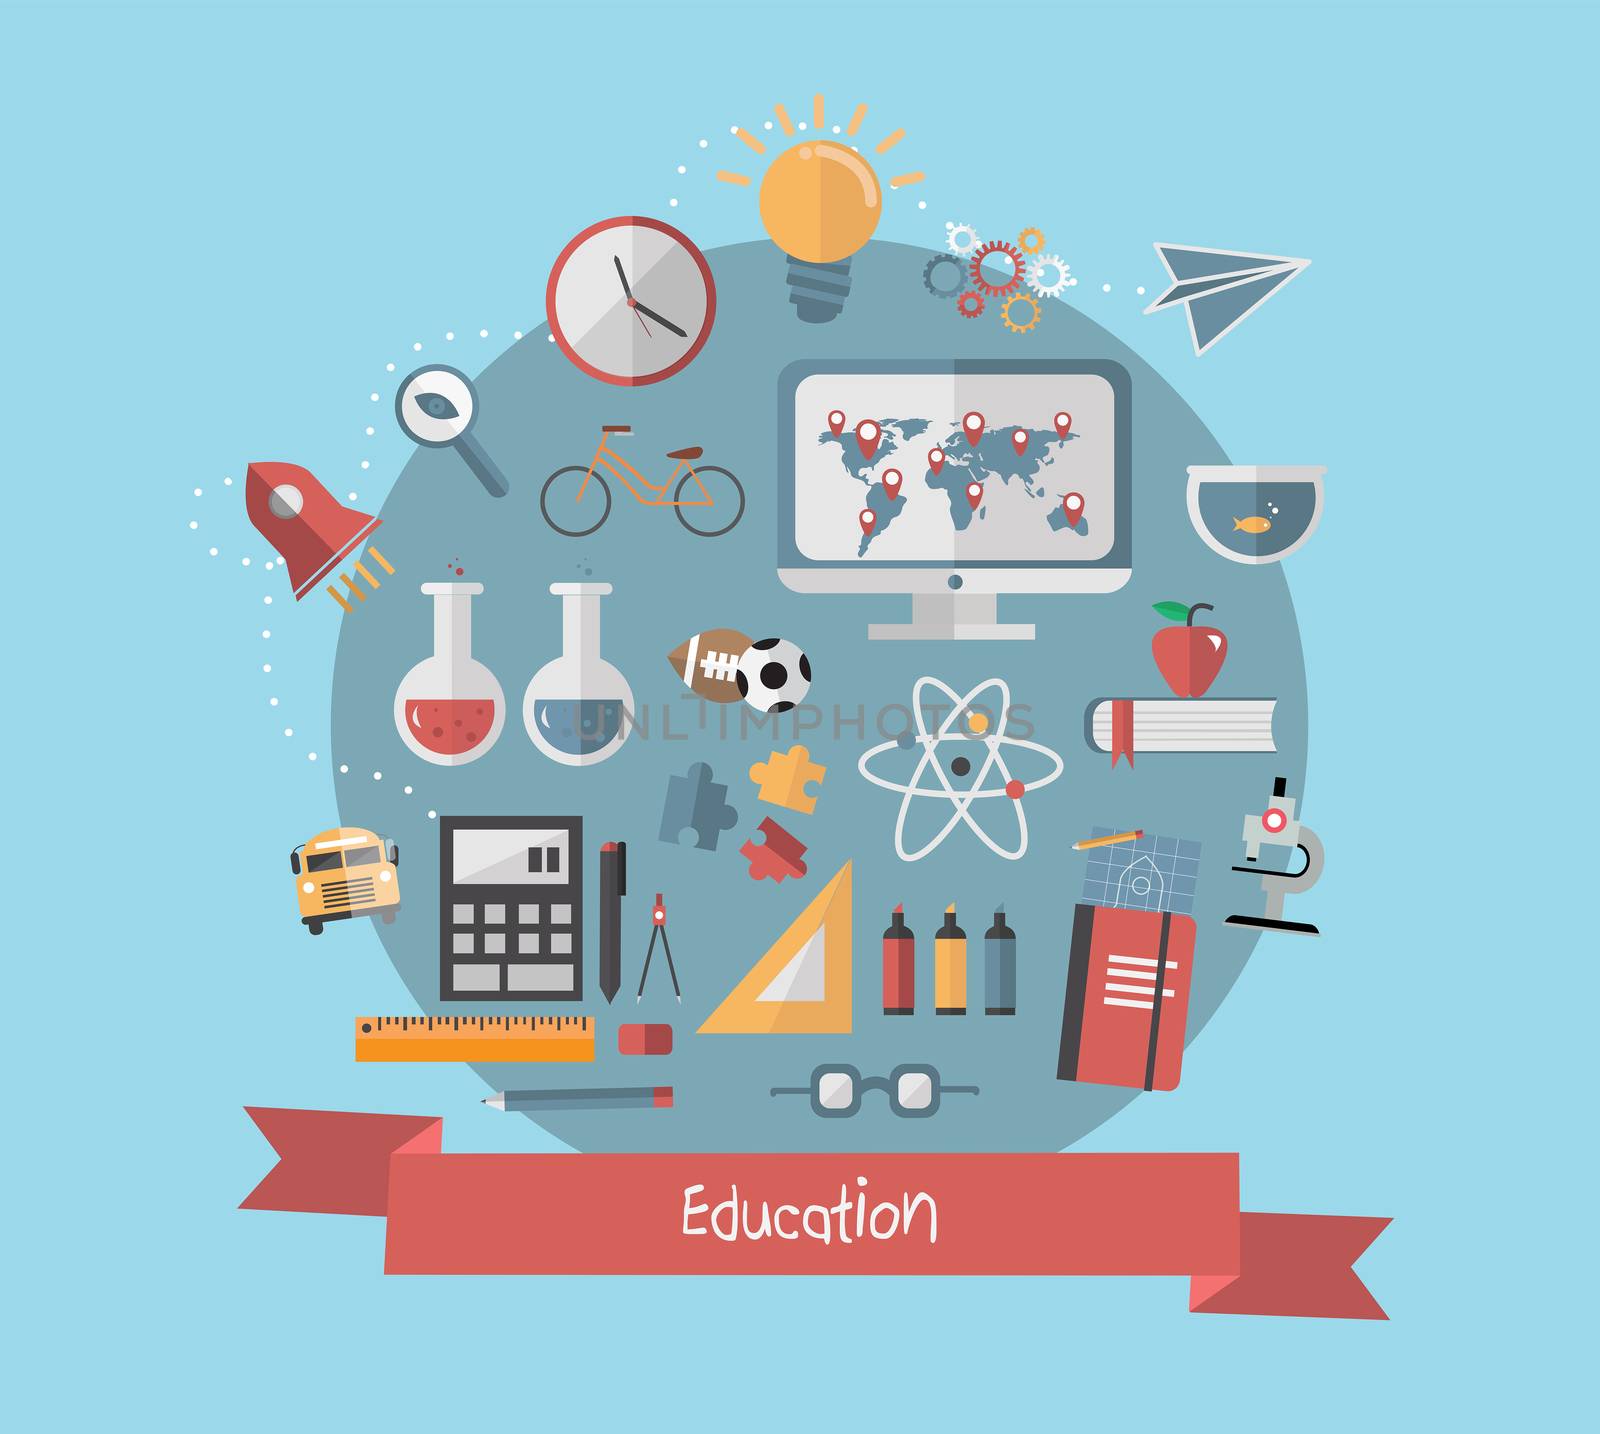 Education banner with school icons on blue background